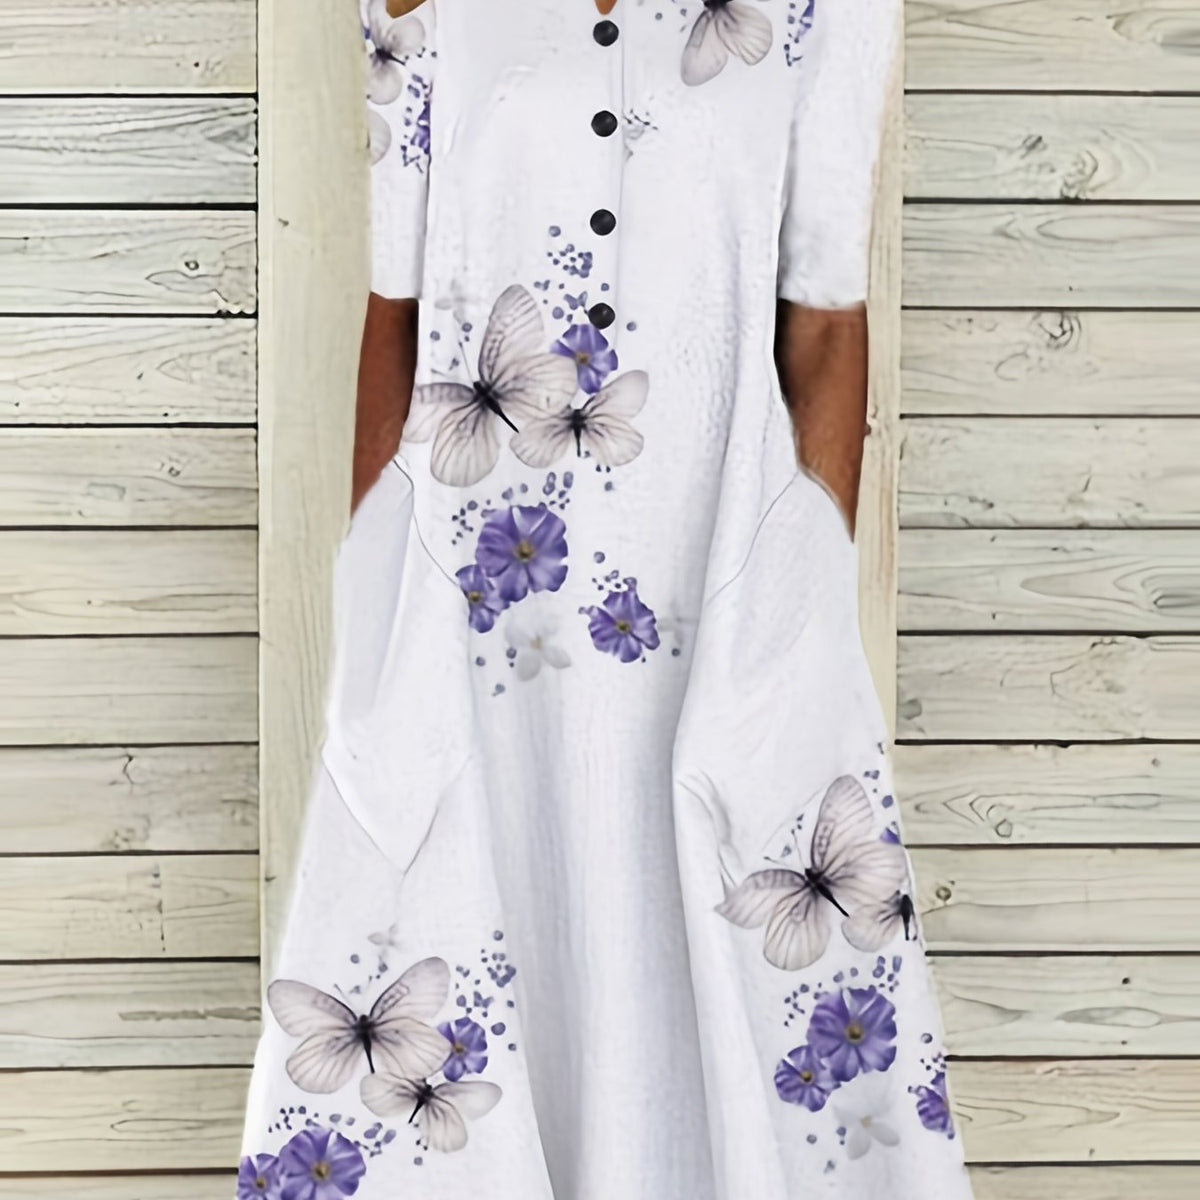 「binfenxie」Floral & Butterfly Print V Neck Dress, Casual Button Front Short Sleeve Dress For Spring & Summer, Women's Clothing